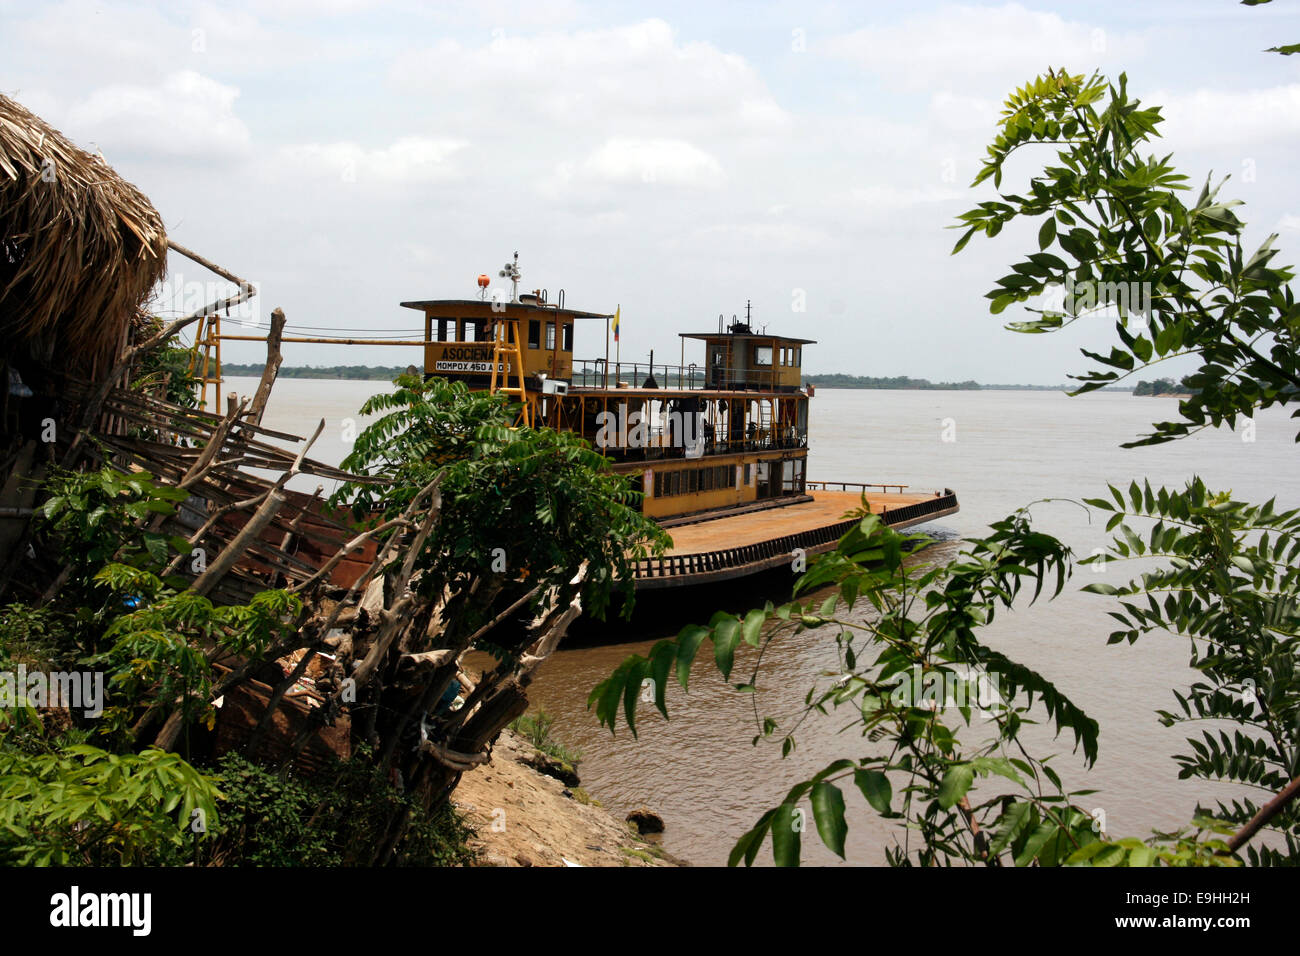 Boat on the Magdalena River, Colombia on Tuesday 6 April 2010 Stock Photo